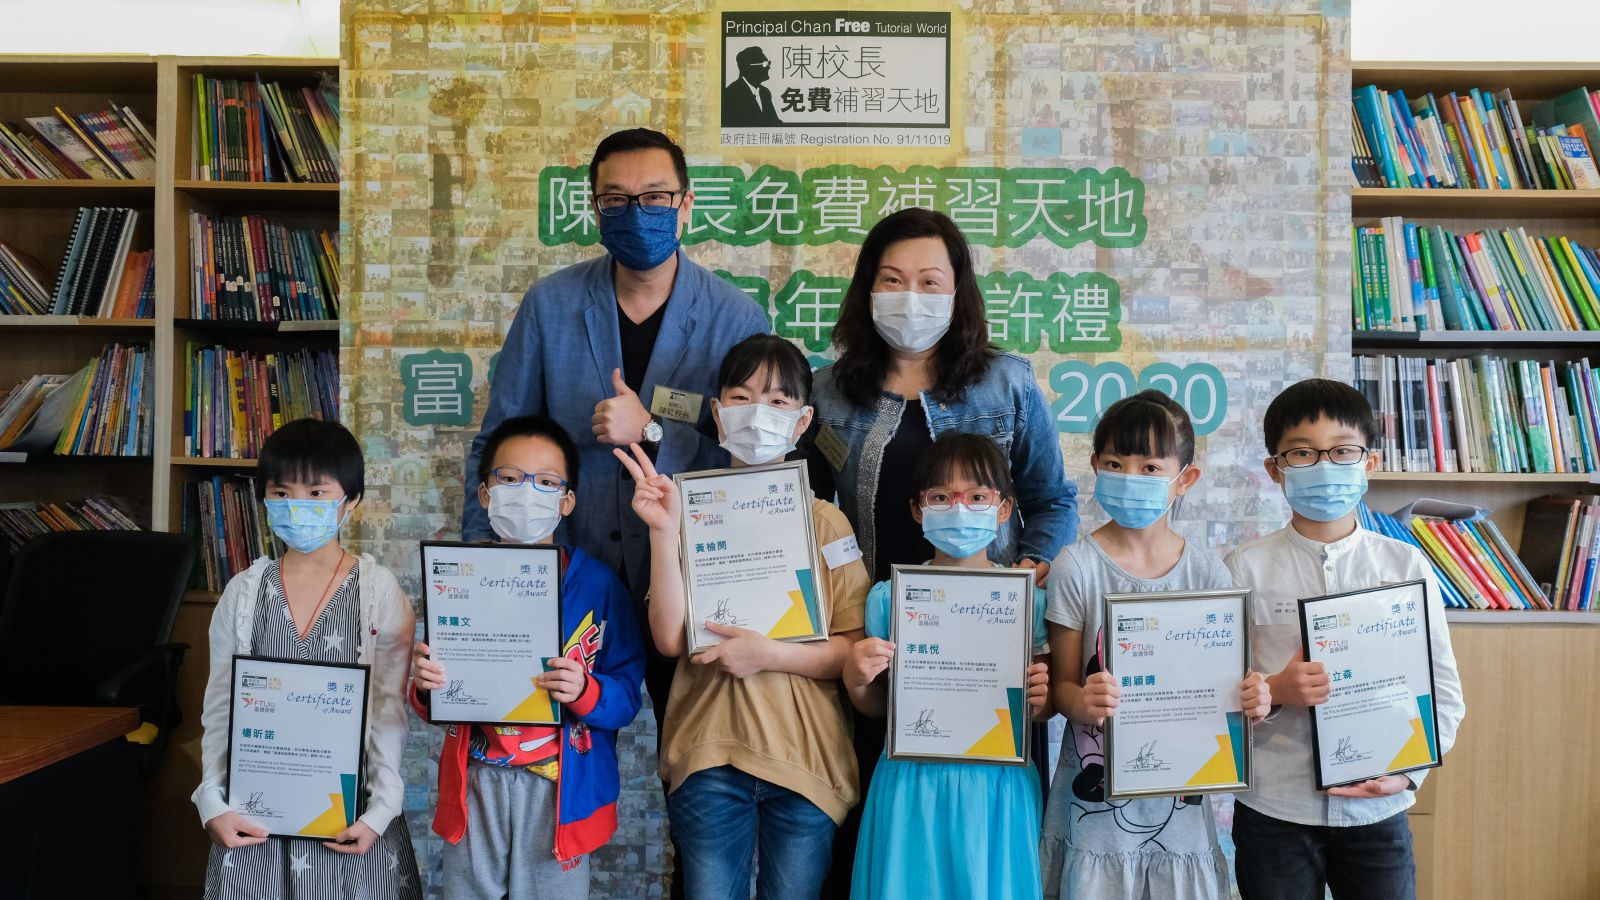 332 students won FTLife Scholarship as they smashed their learning targets despite the pandemic